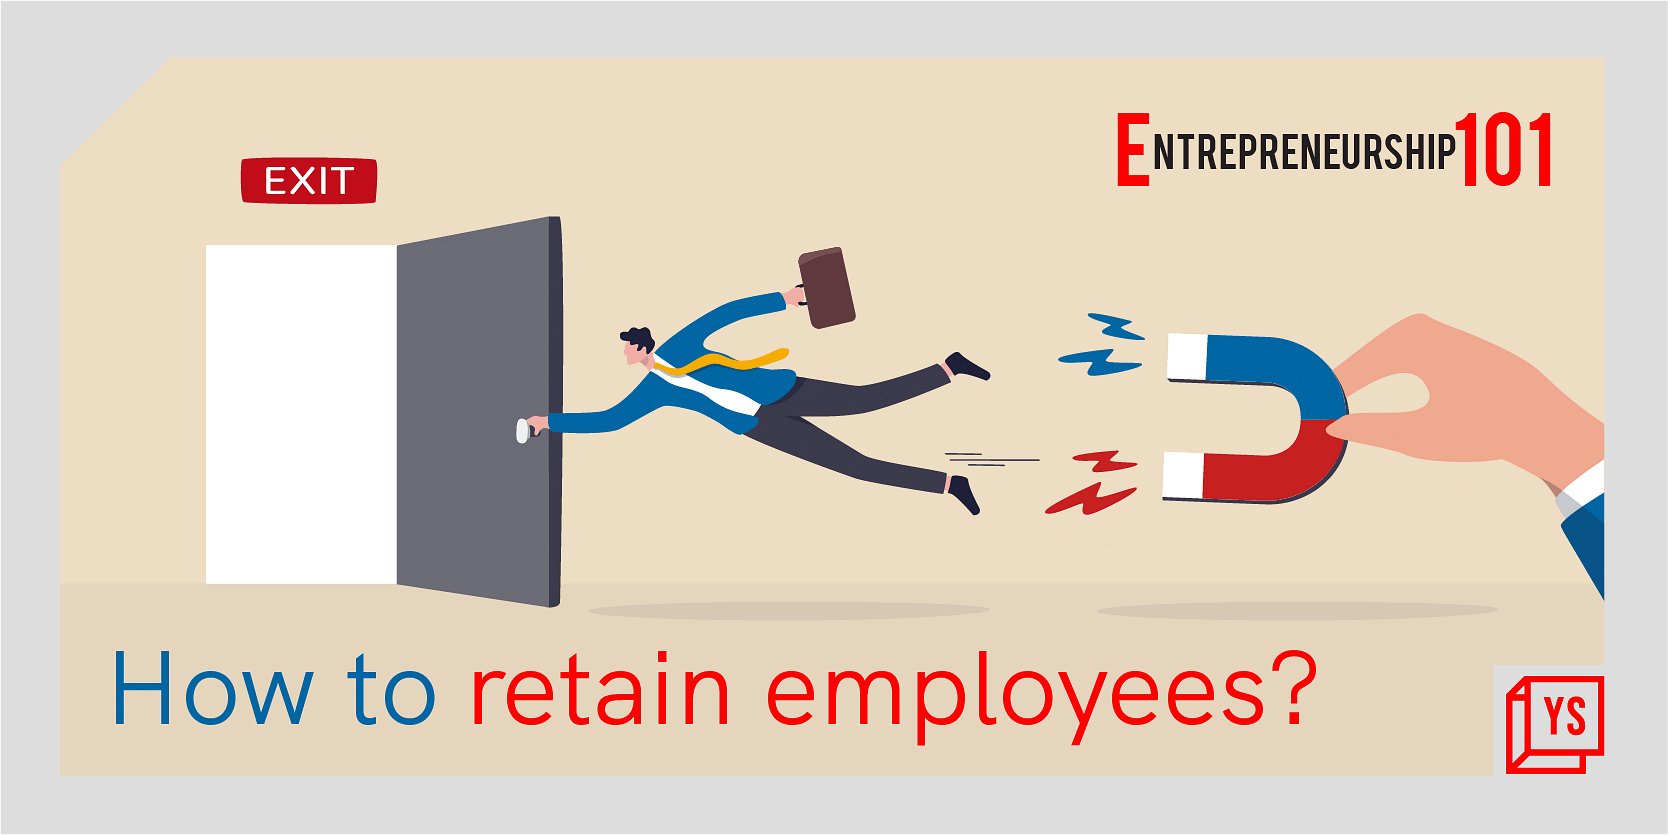 You are currently viewing Entrepreneurship 101: How to retain employees?